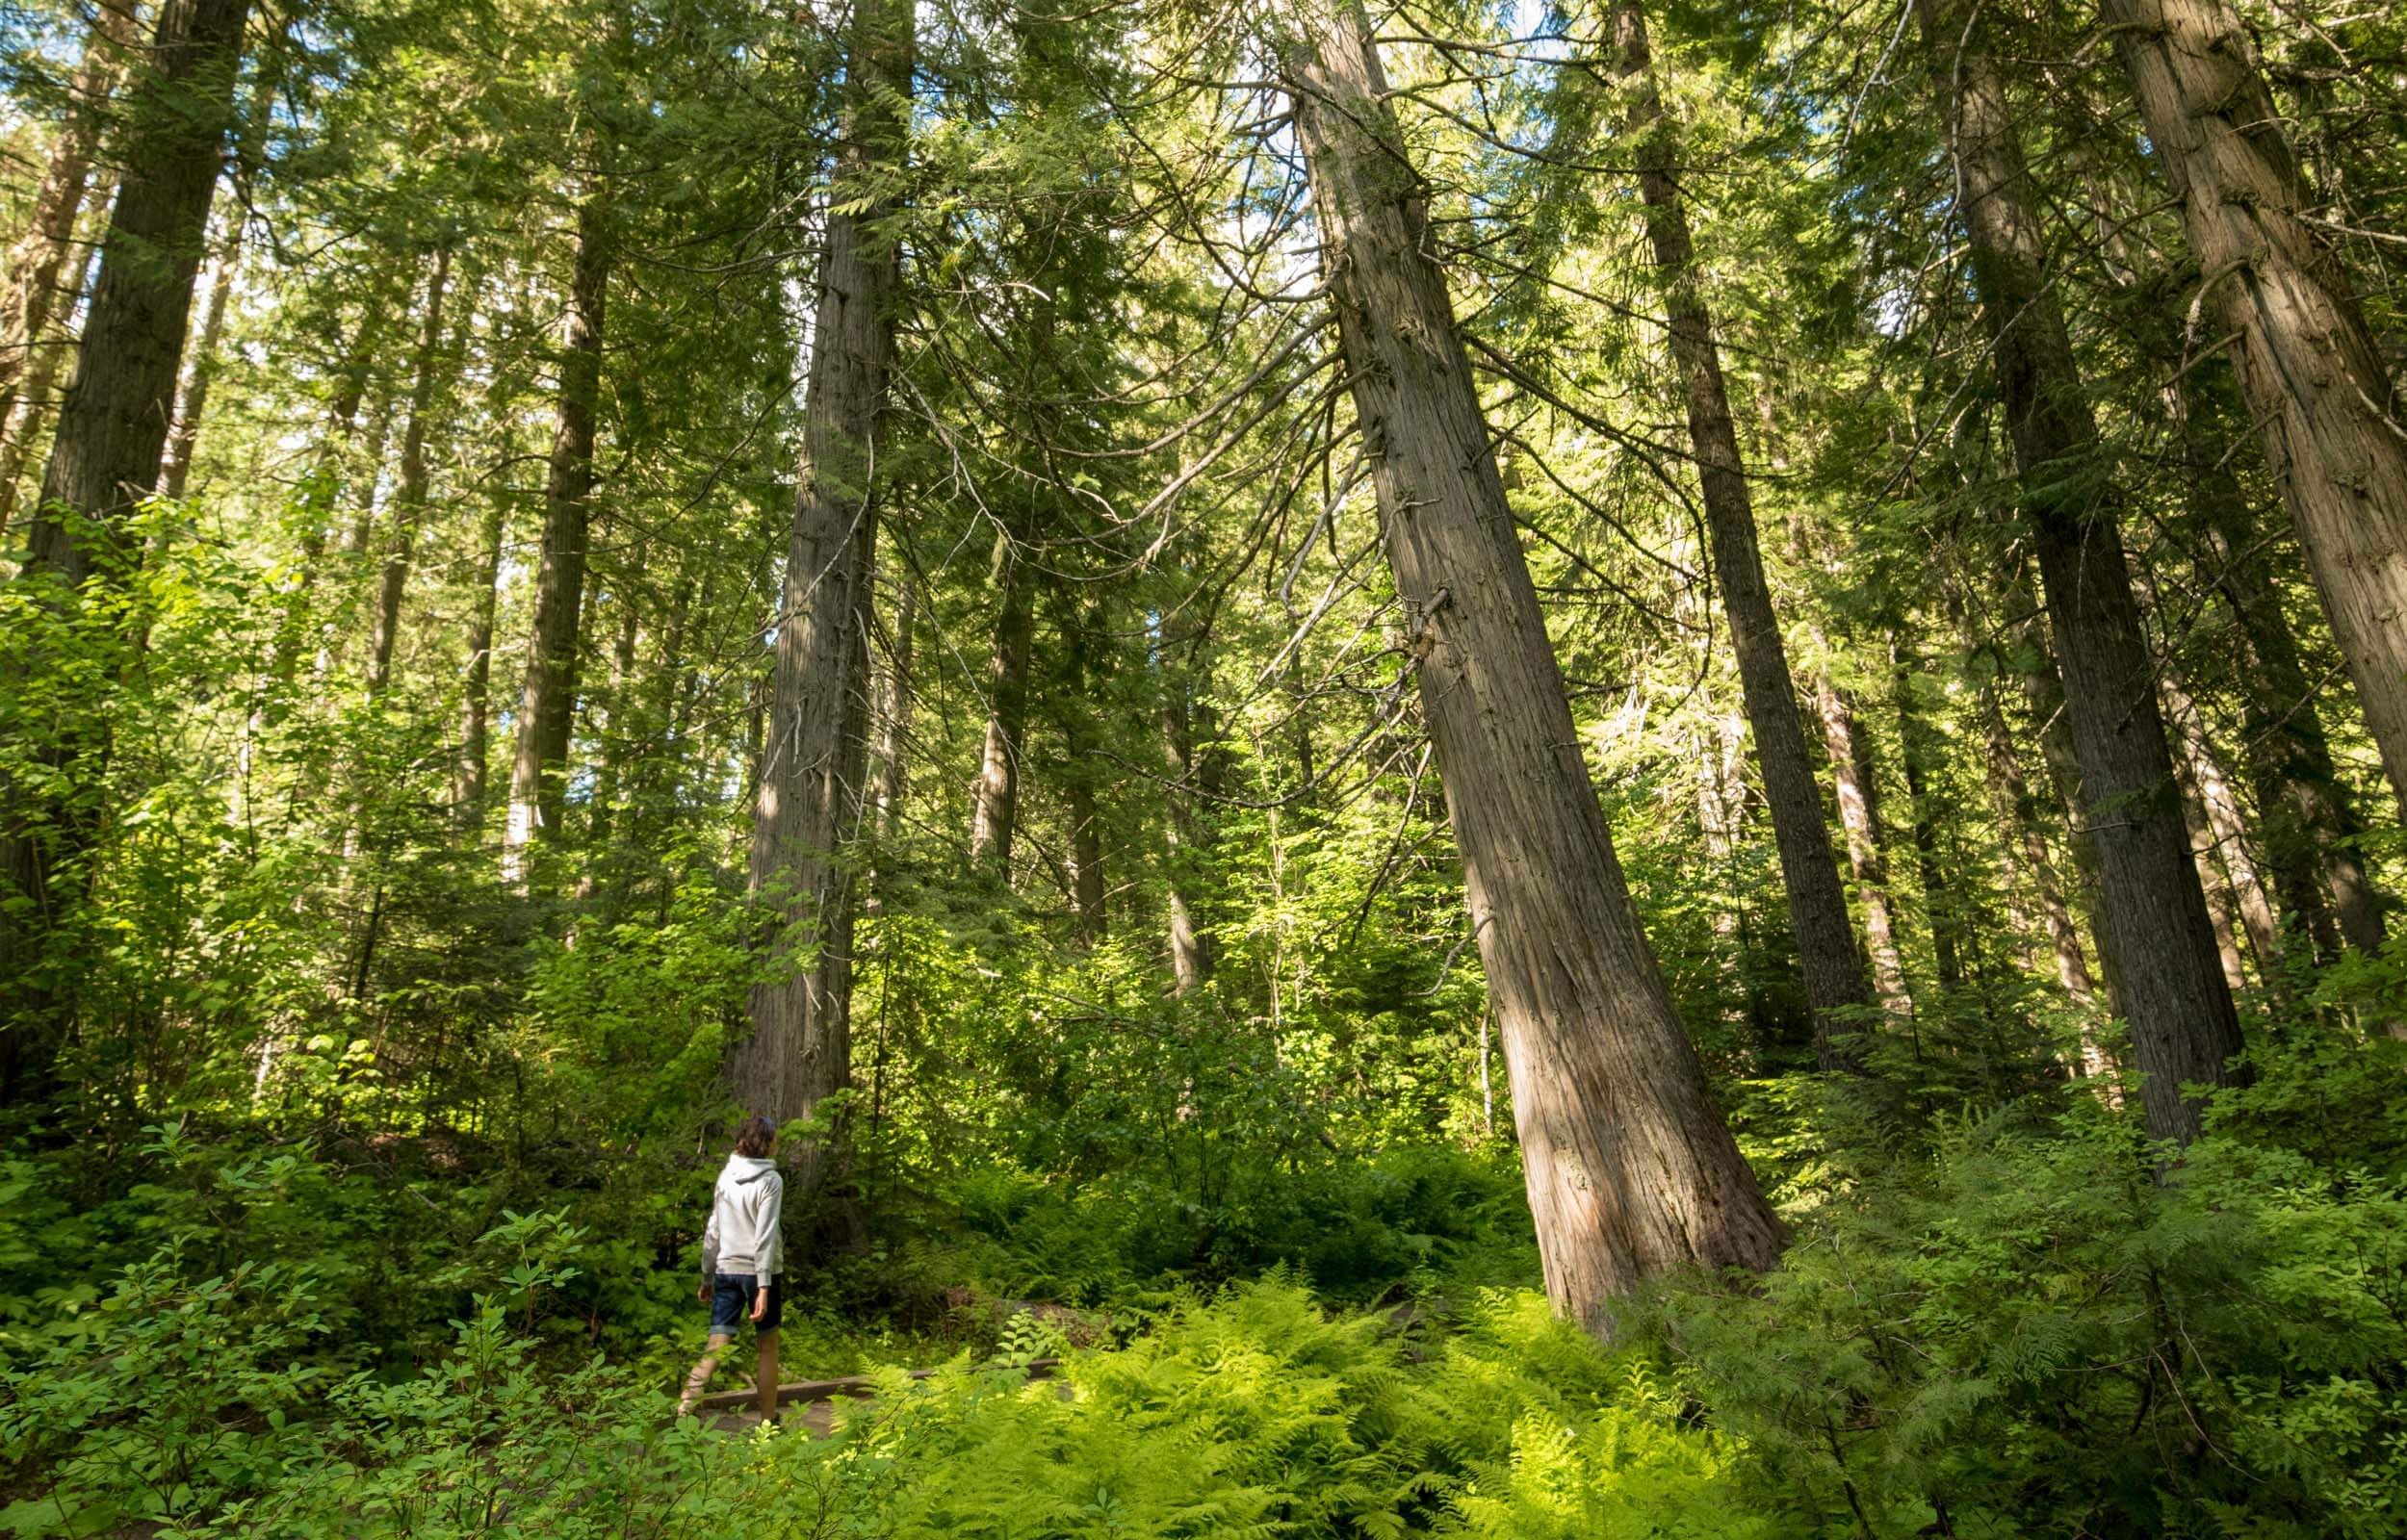 A person walks on a dirt path through tall trees and dense green forest.